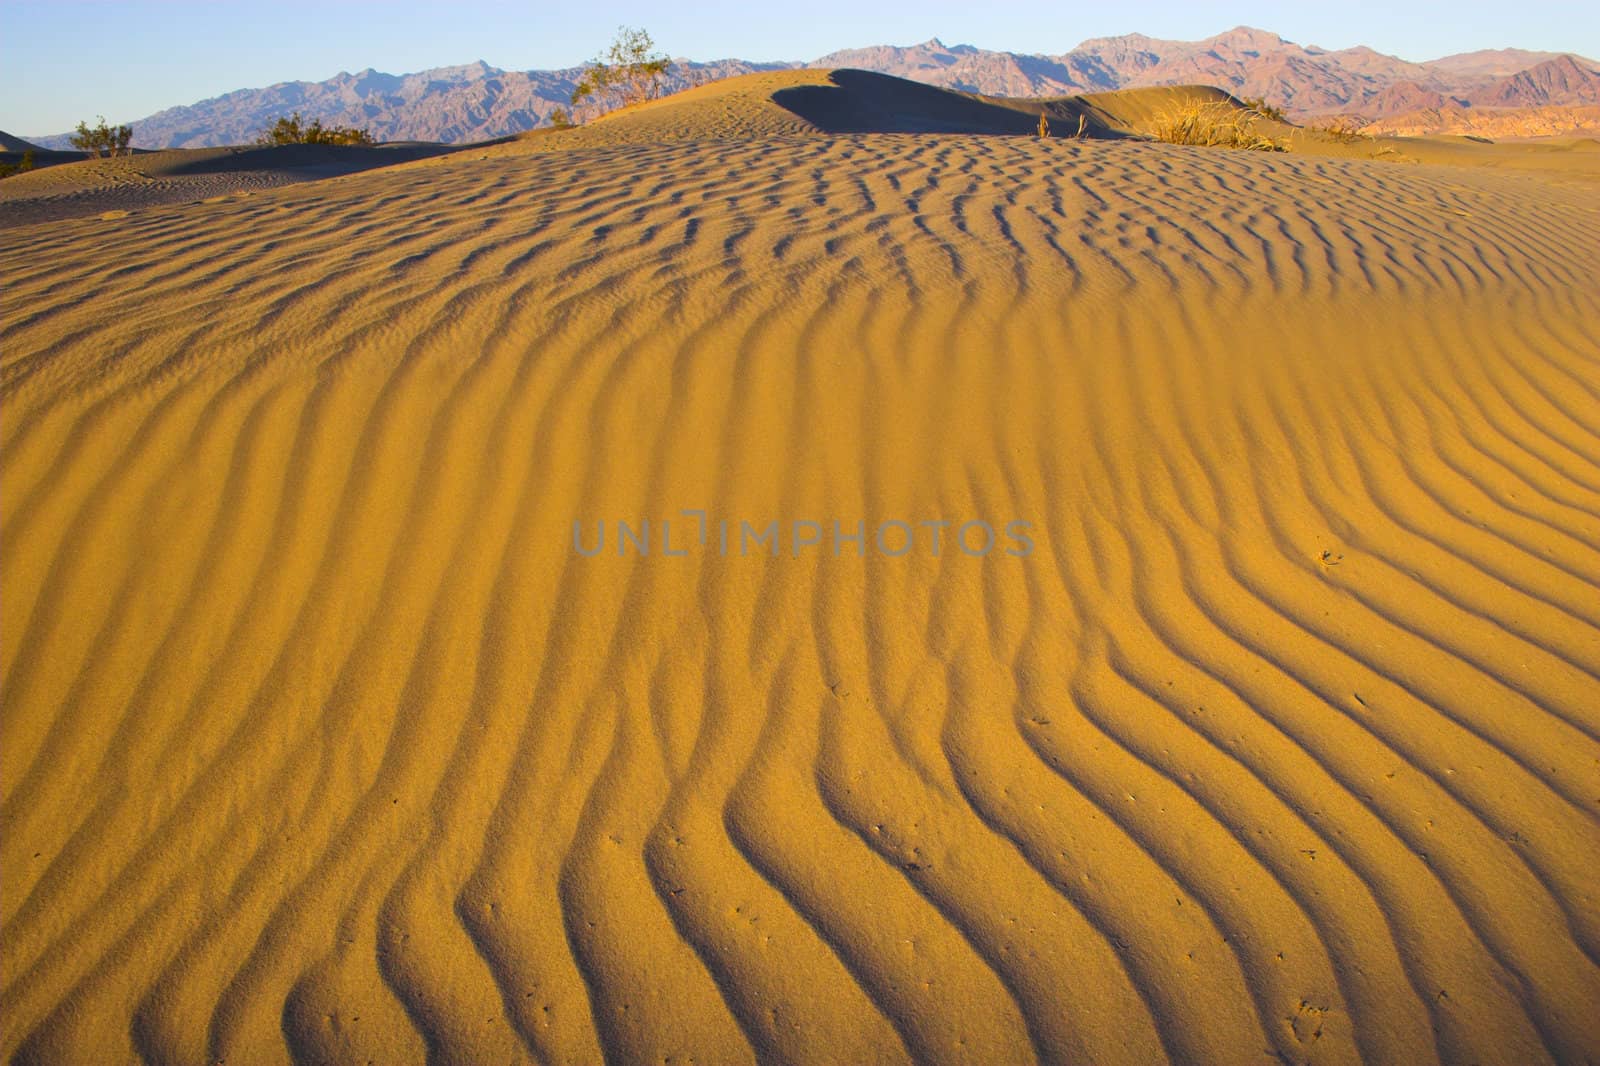 Sandscapes of Death Valley by georgeburba